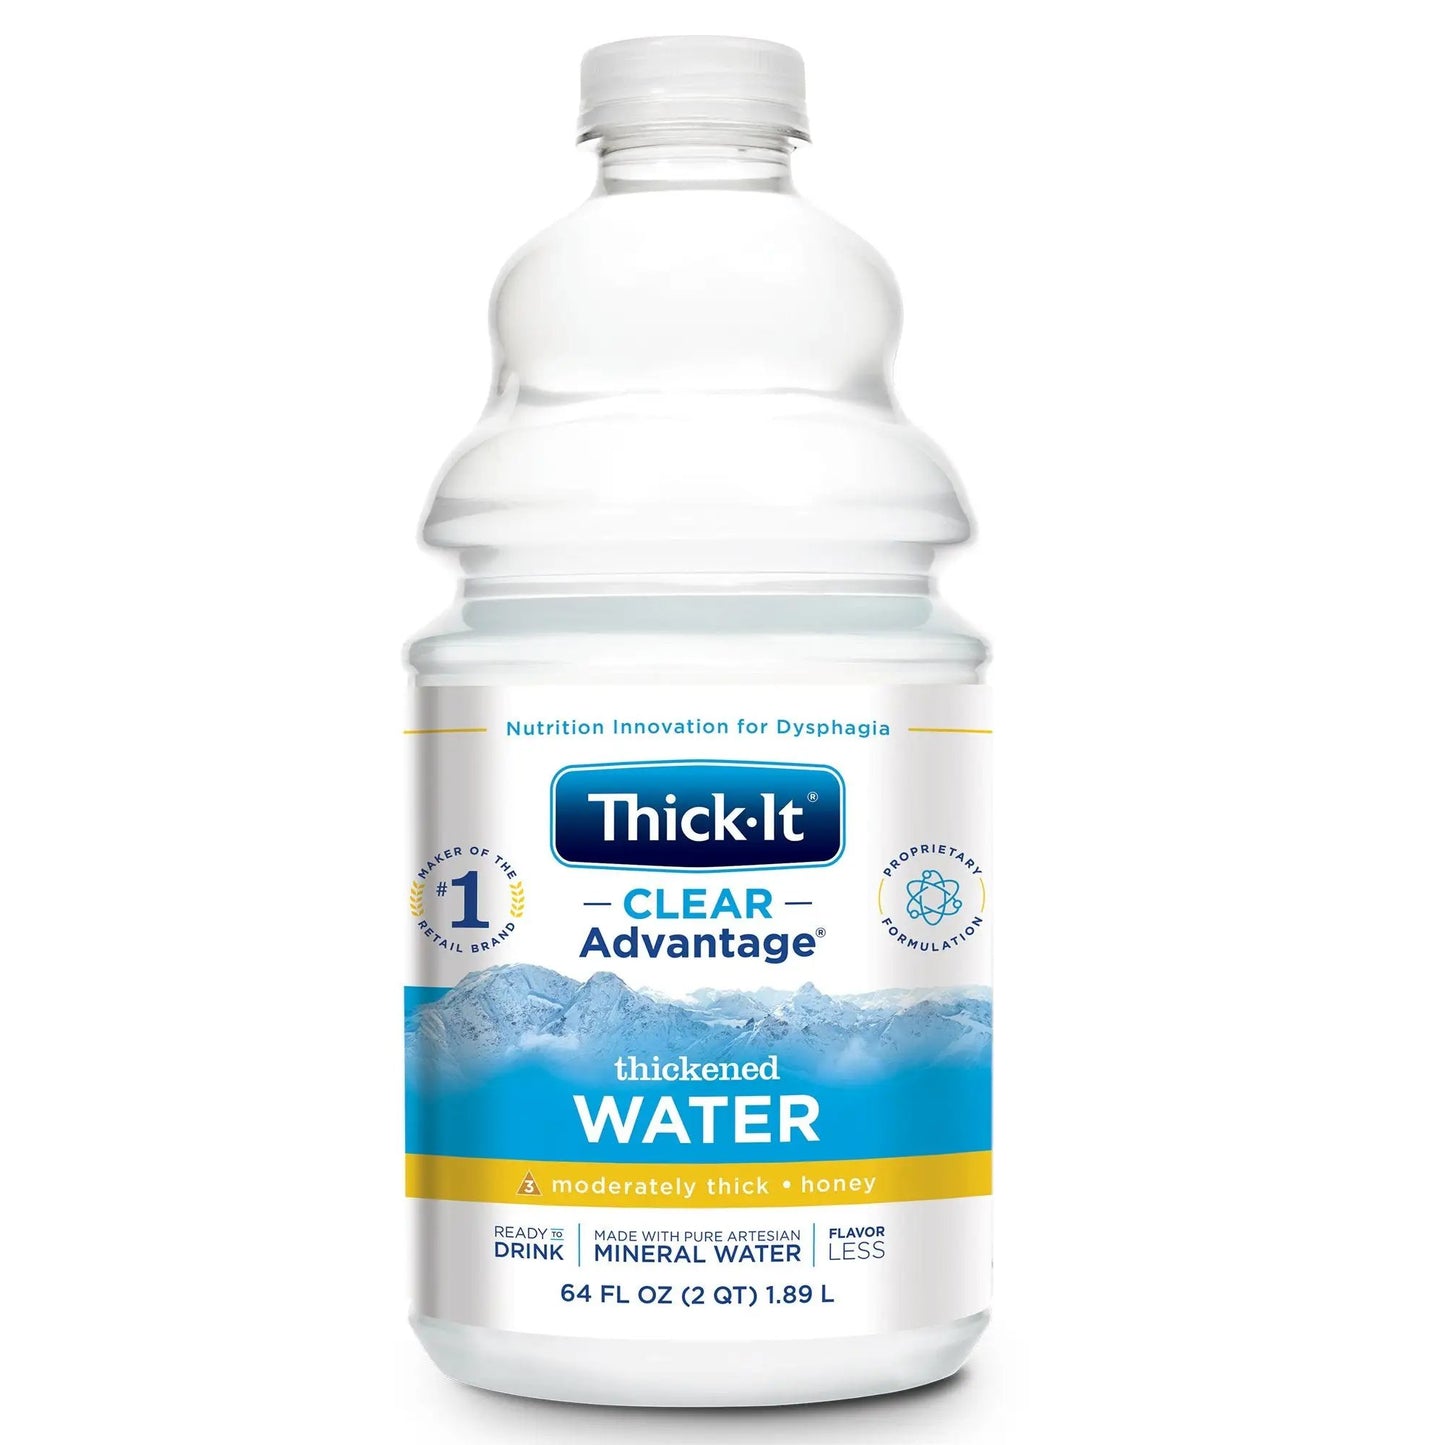 Thick-It Clear Advantage Honey Consistency Uned Thickened Water, 64 oz.